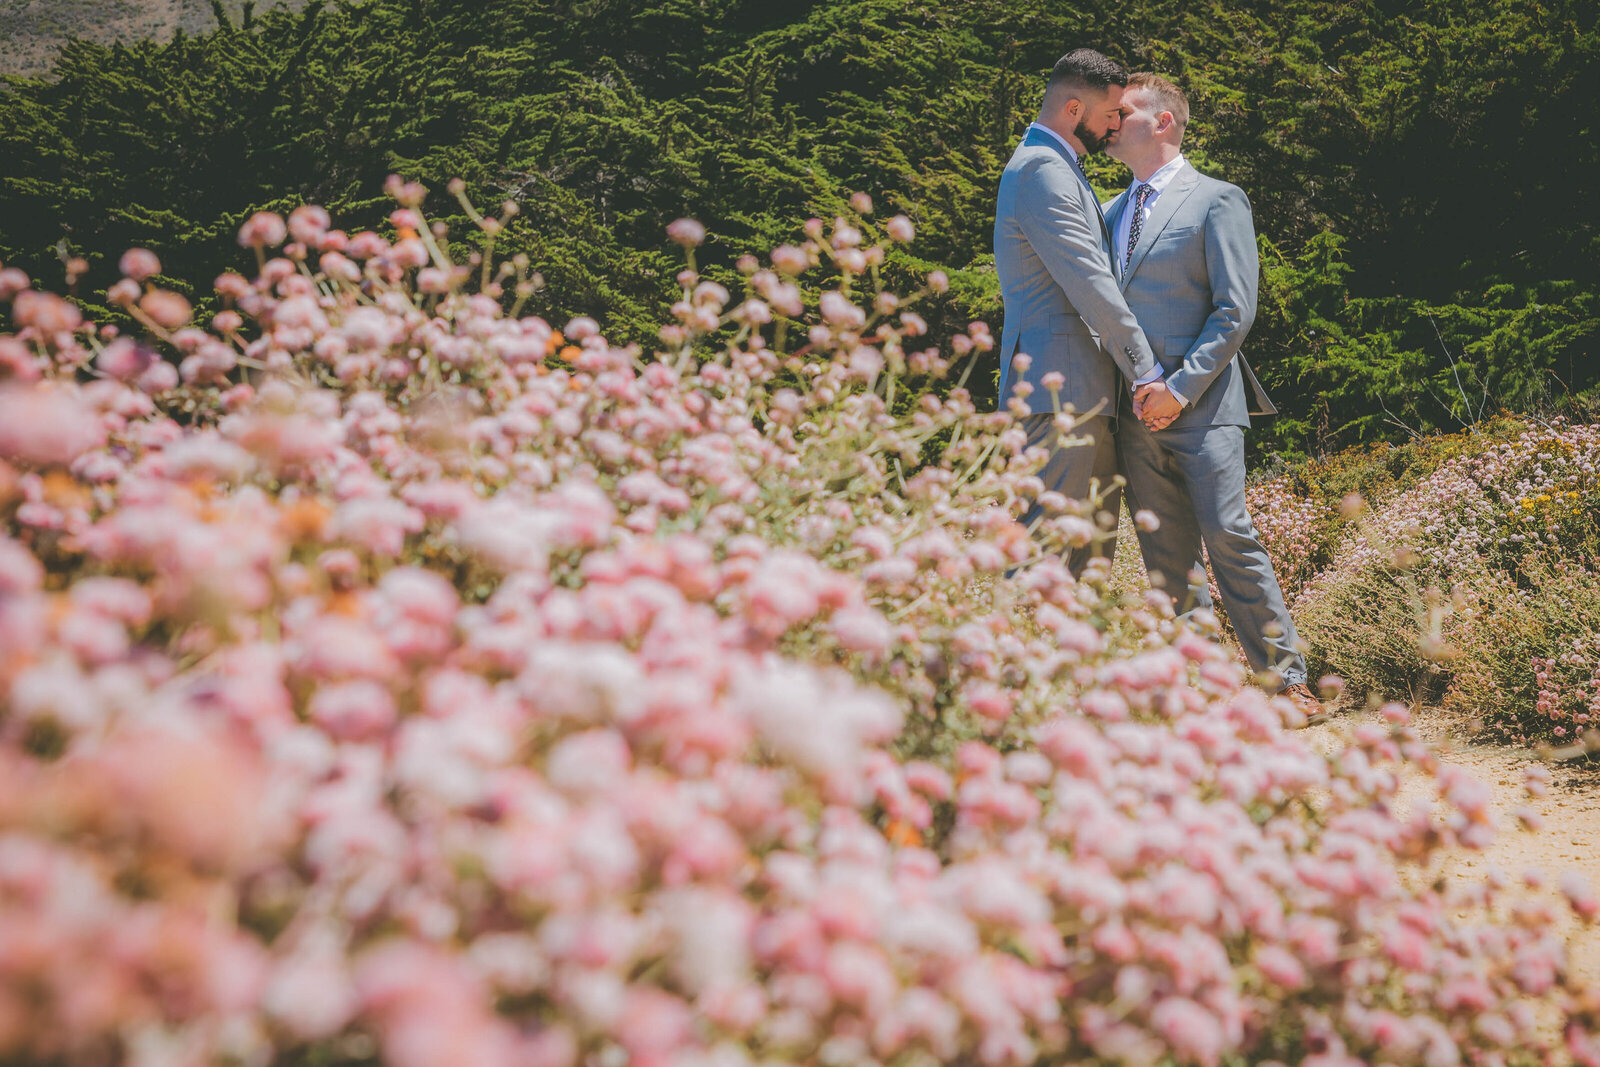 A gay couple kisses with pink flowers in the foreground.